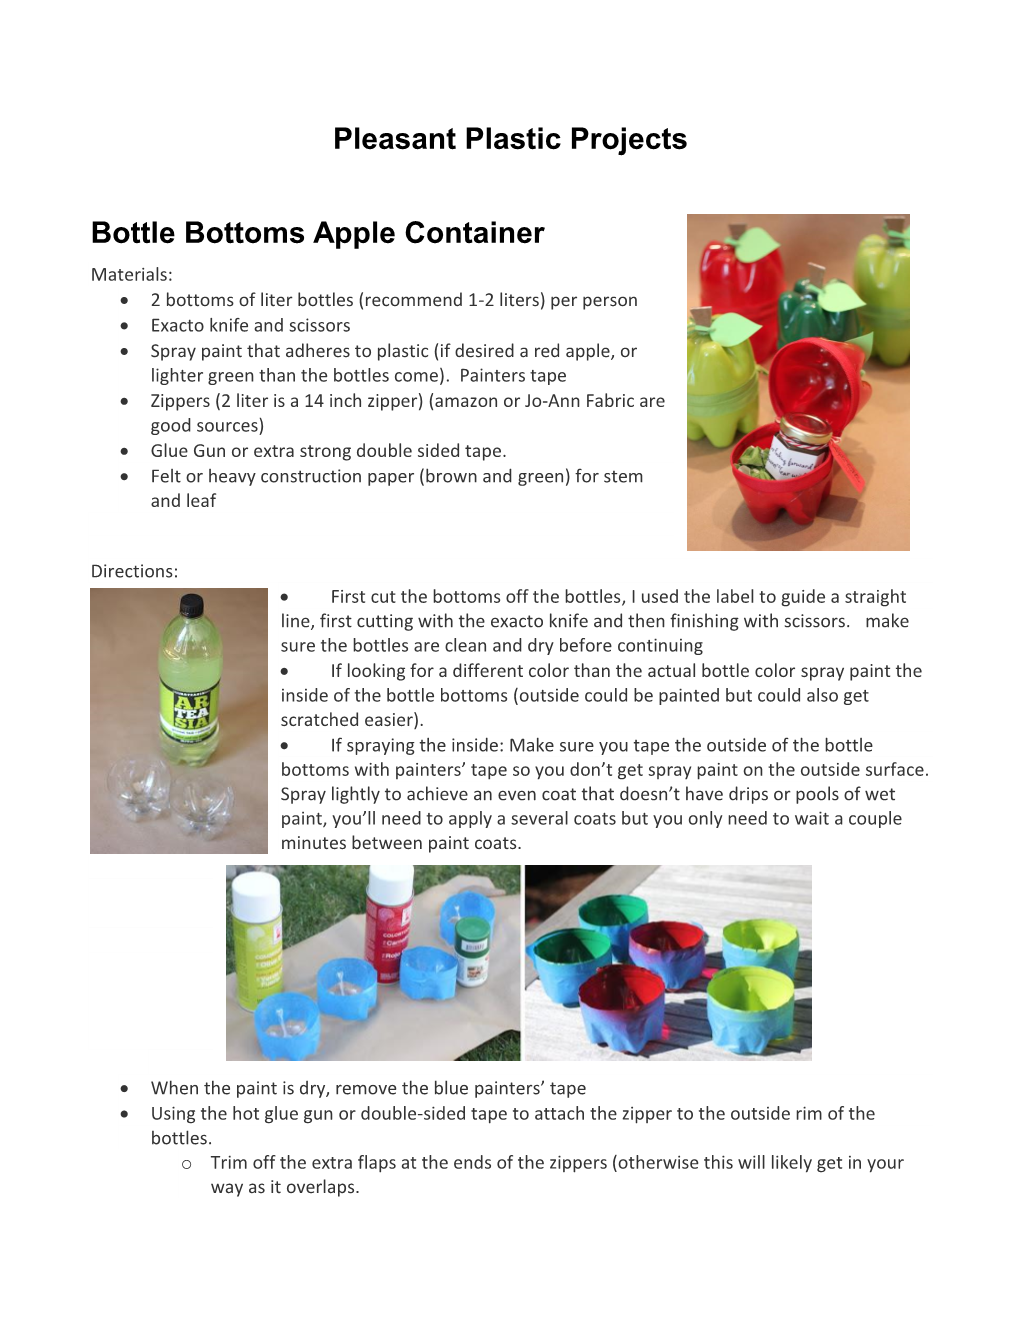 Pleasant Plastic Projects Bottle Bottoms Apple Container